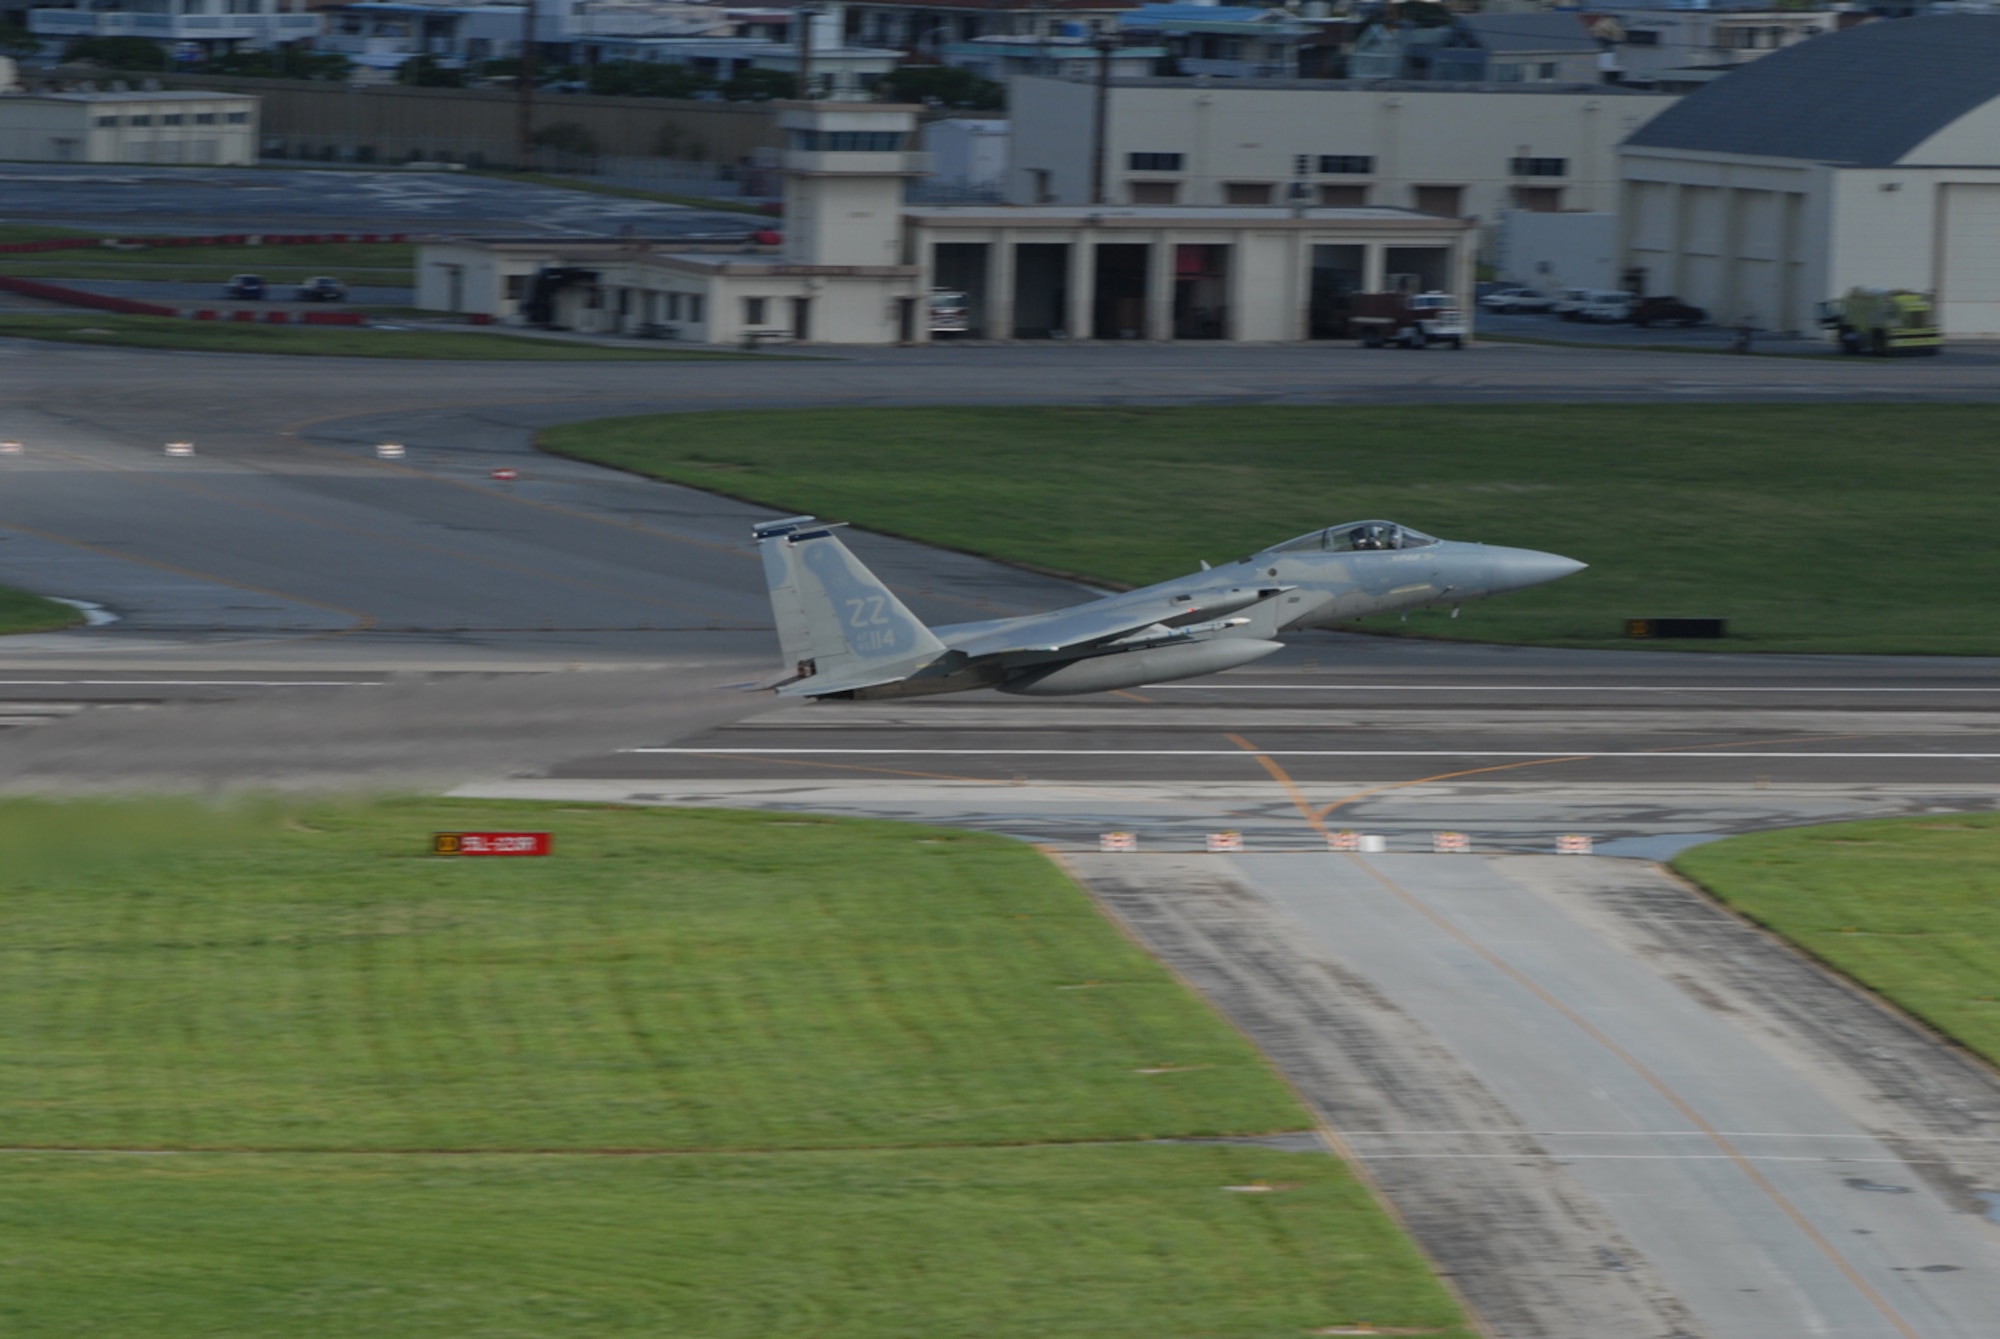 A 44th Fighter Squadron F-15C Eagle takes off at Kadena Air Base, Japan, Aug. 5, 2007, en route to Guam in support of Exercise Valiant Shield.  More than 400 Airmen and F-15Cs, KC-135R Stratotankers and E-3 Airborne Warning and Control System aircraft are participating in the weeklong Pacific Command joint exercise which focuses on integrated joint training to enable real-world proficiency in sustaining forces and detecting, locating, tracking and engaging units at sea, in the air, on land, and cyberspace in response to a range of mission areas.   U.S. Air Force photo/Senior Airman Darnell T. Cannady